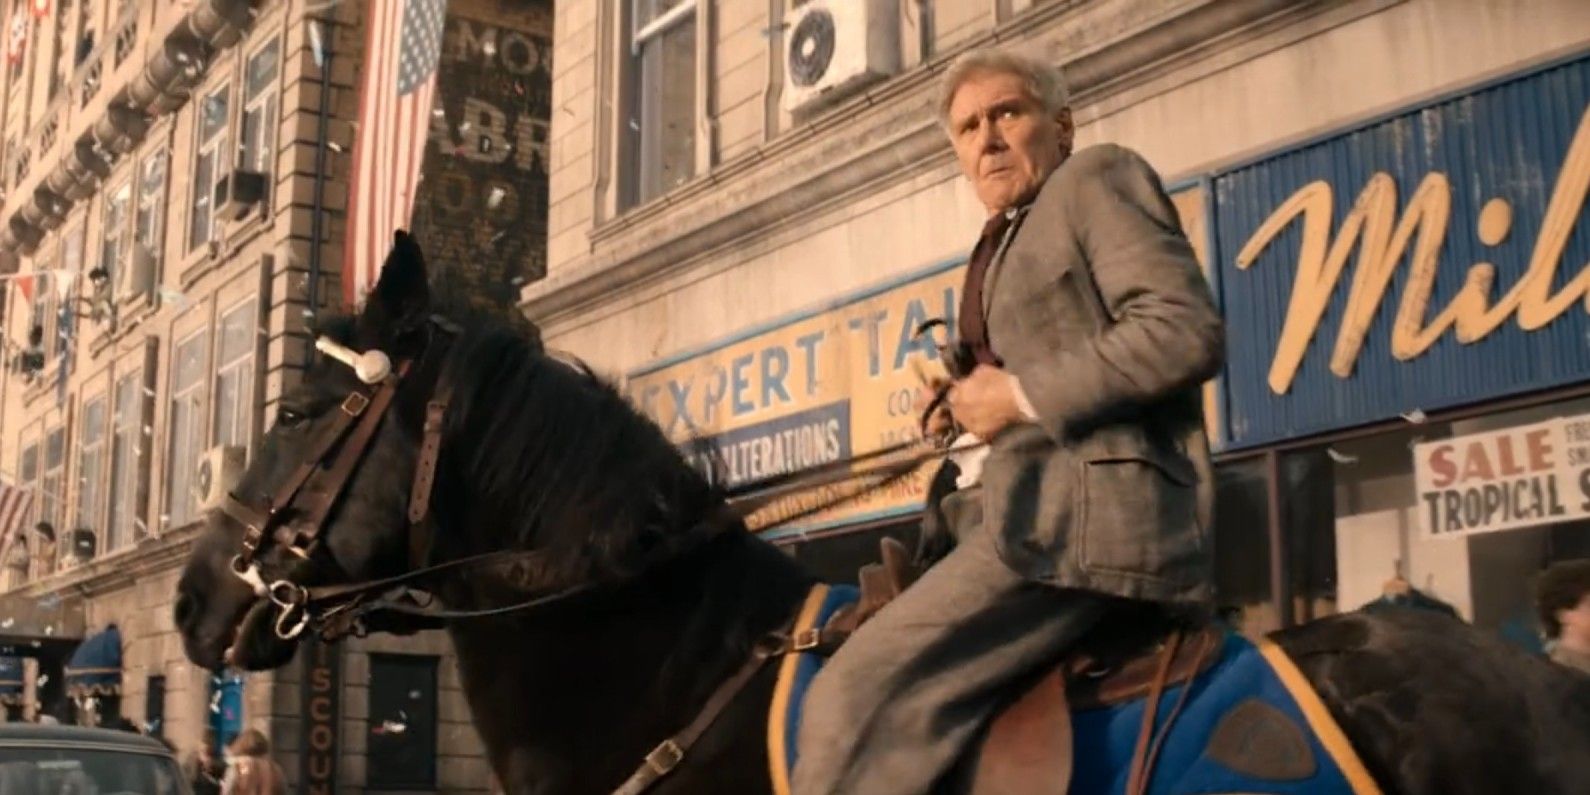 Indiana Jones riding a horse on Moon Day in Indiana Jones and the Dial of Destiny